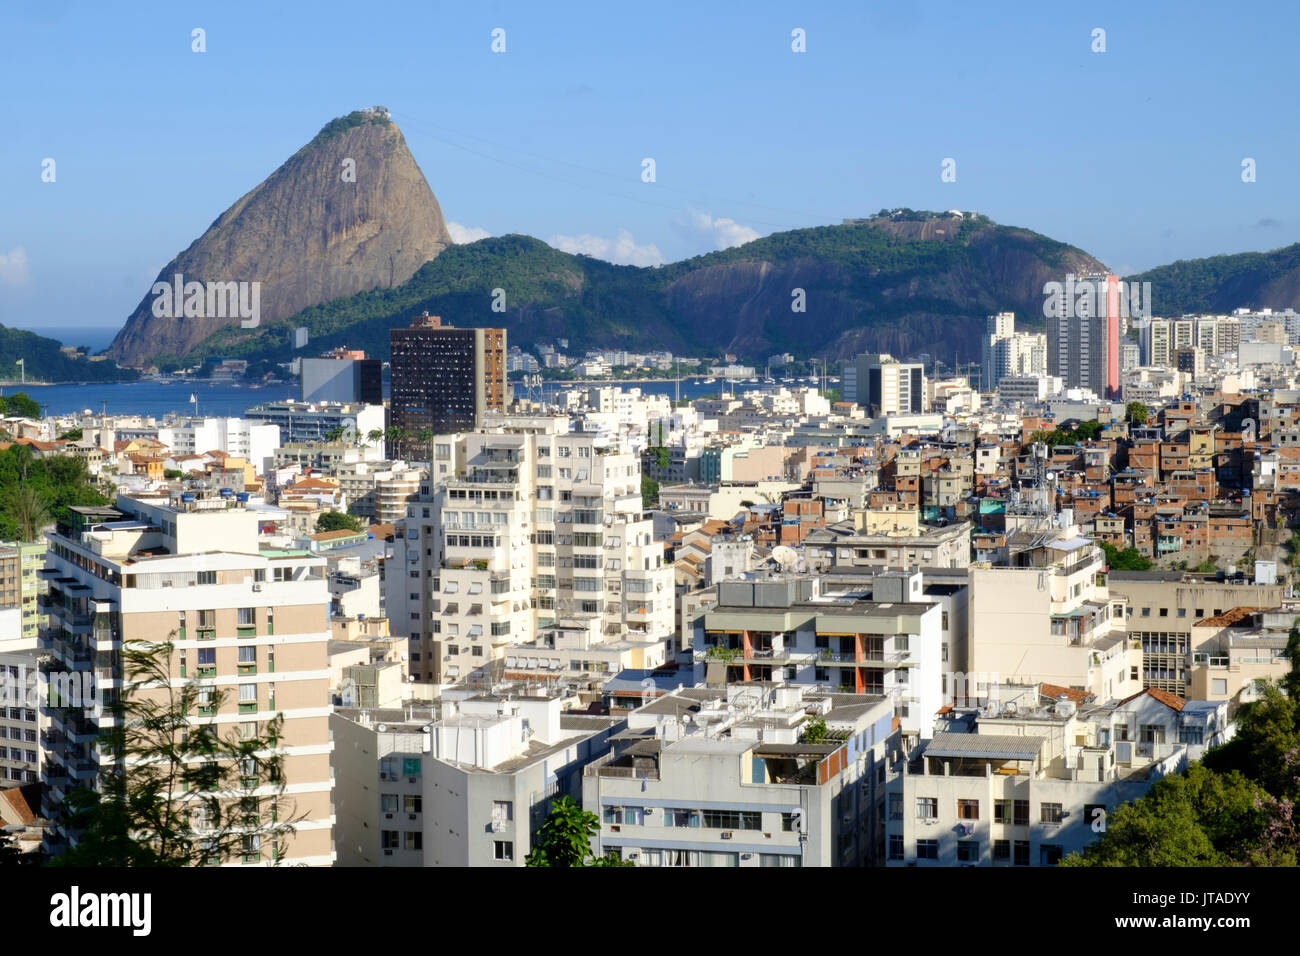 View of a favela with the Sugar Loaf in the background, Rio de Janeiro, Brazil Stock Photo